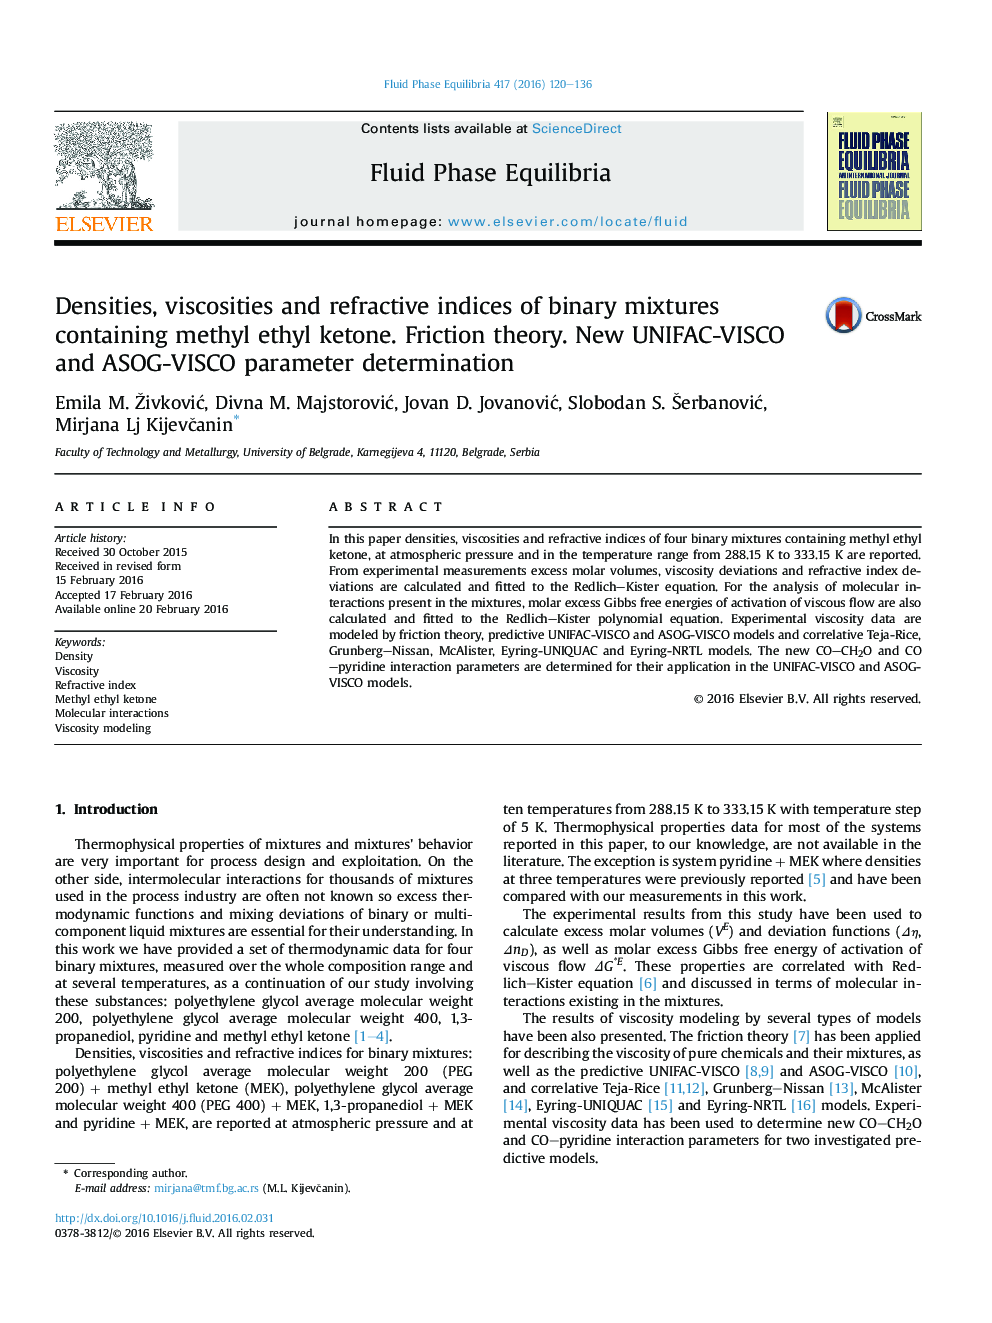 Densities, viscosities and refractive indices of binary mixtures containing methyl ethyl ketone. Friction theory. New UNIFAC-VISCO and ASOG-VISCO parameter determination